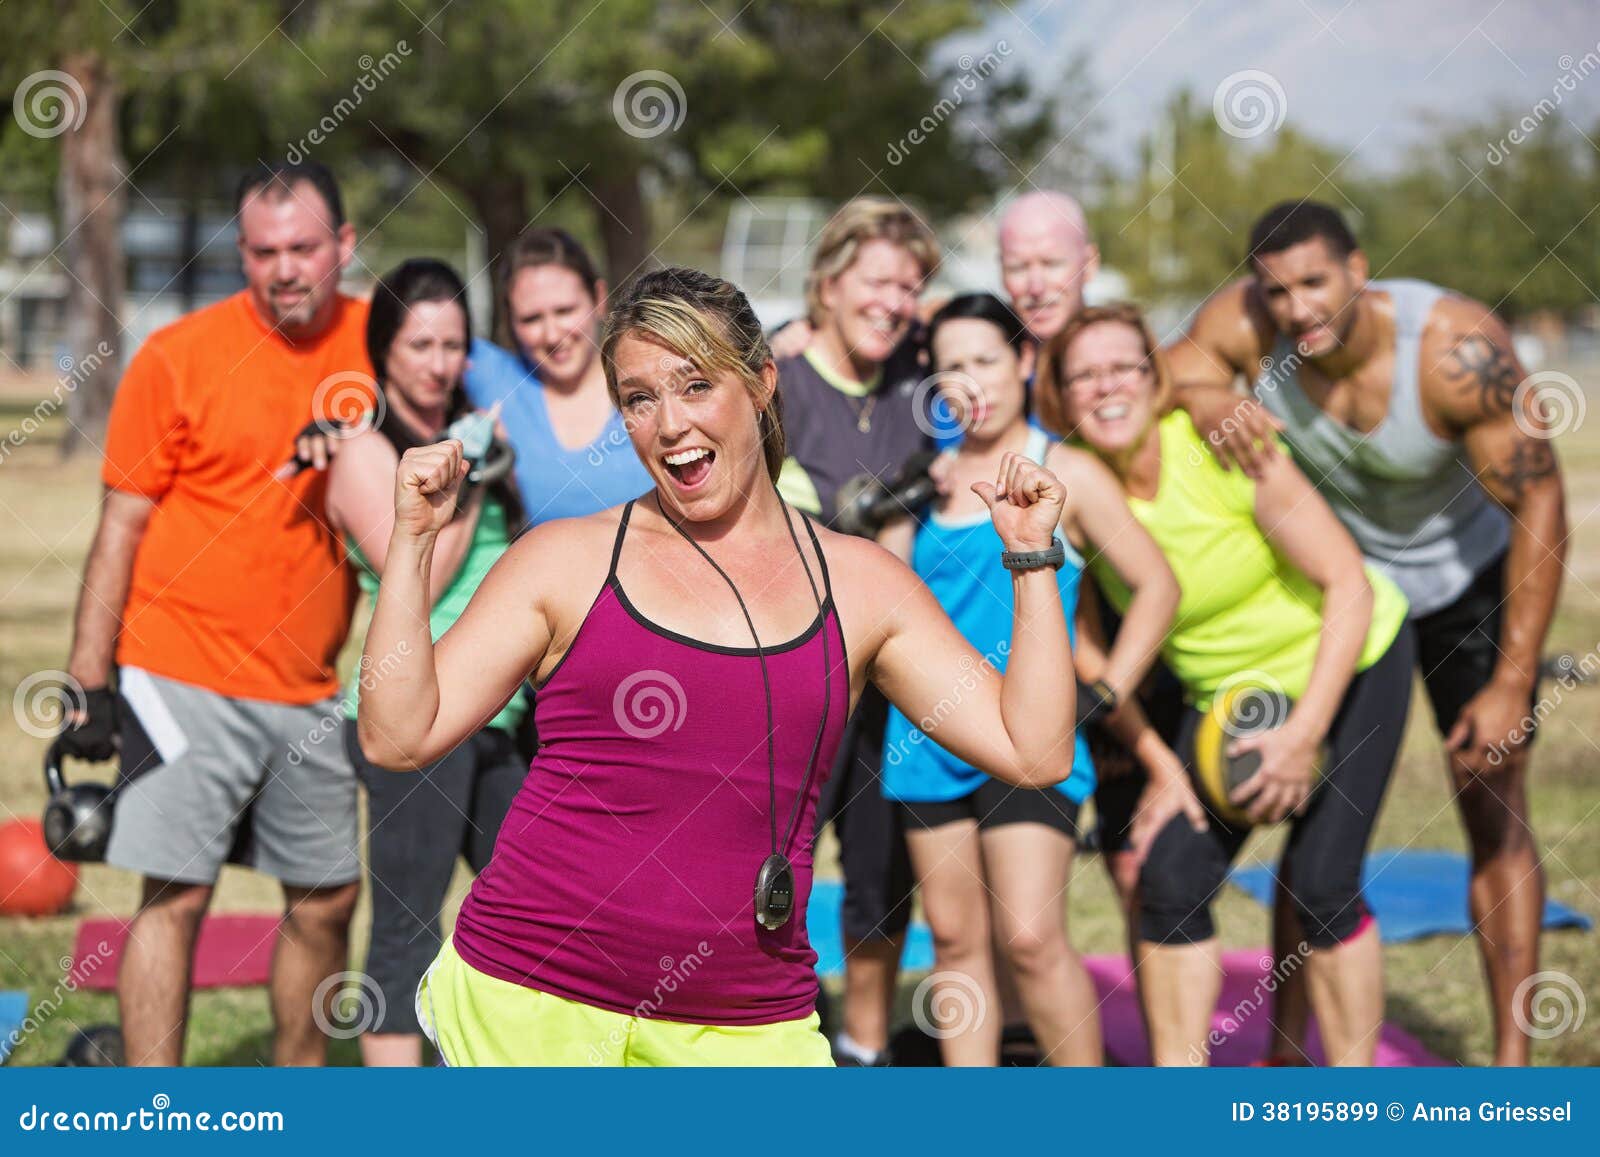 enthusiastic fitness instructor with group